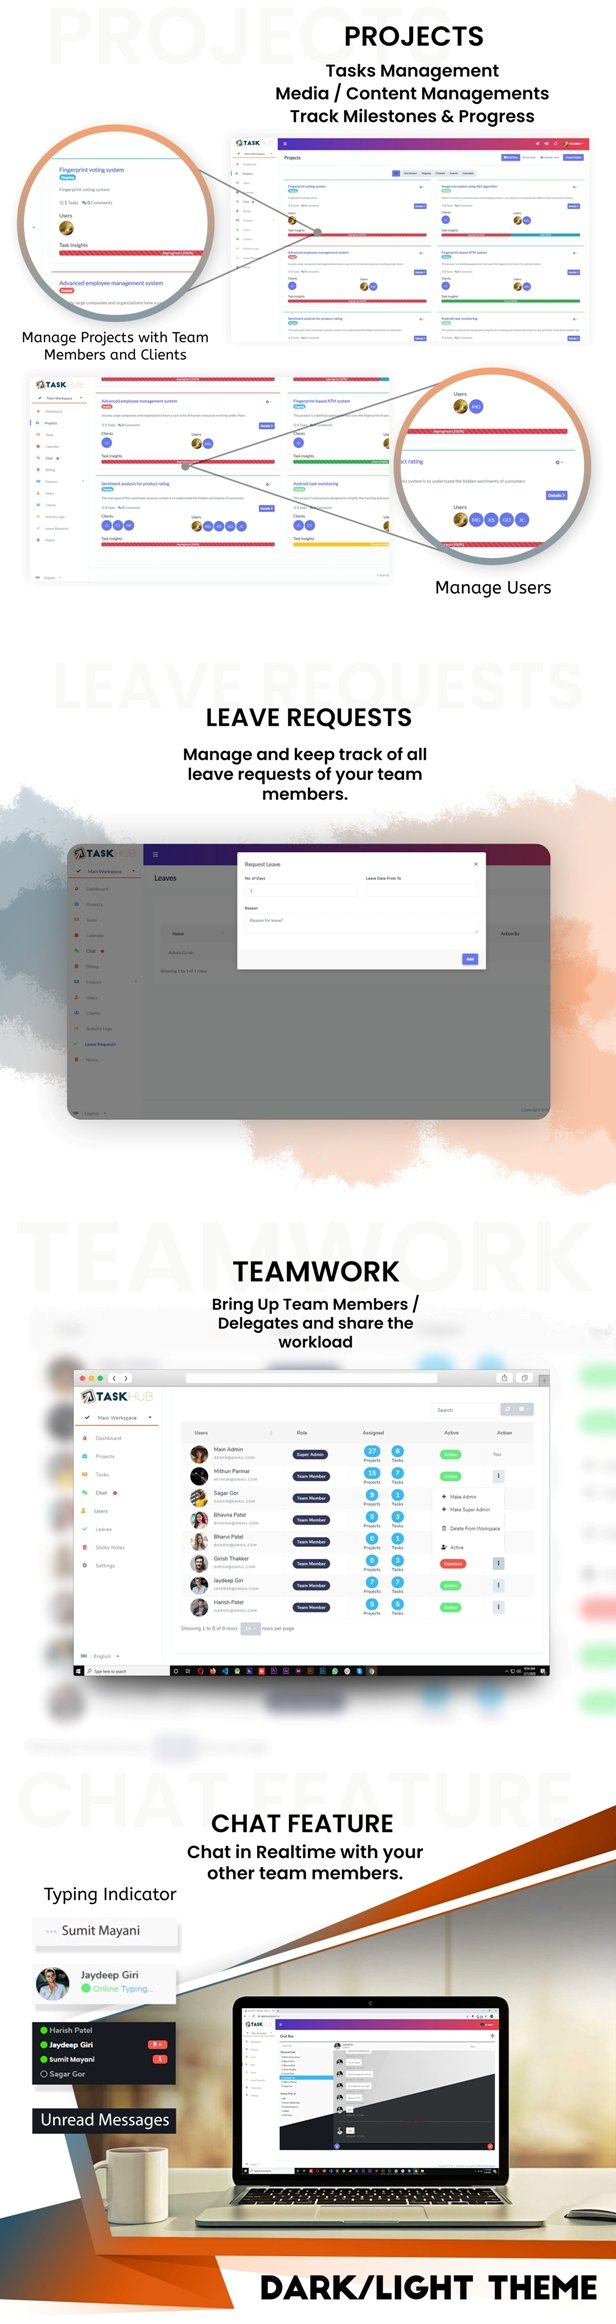 4 - projects-leave-requests-teamwork-chat - Taskhub SaaS - v1.0